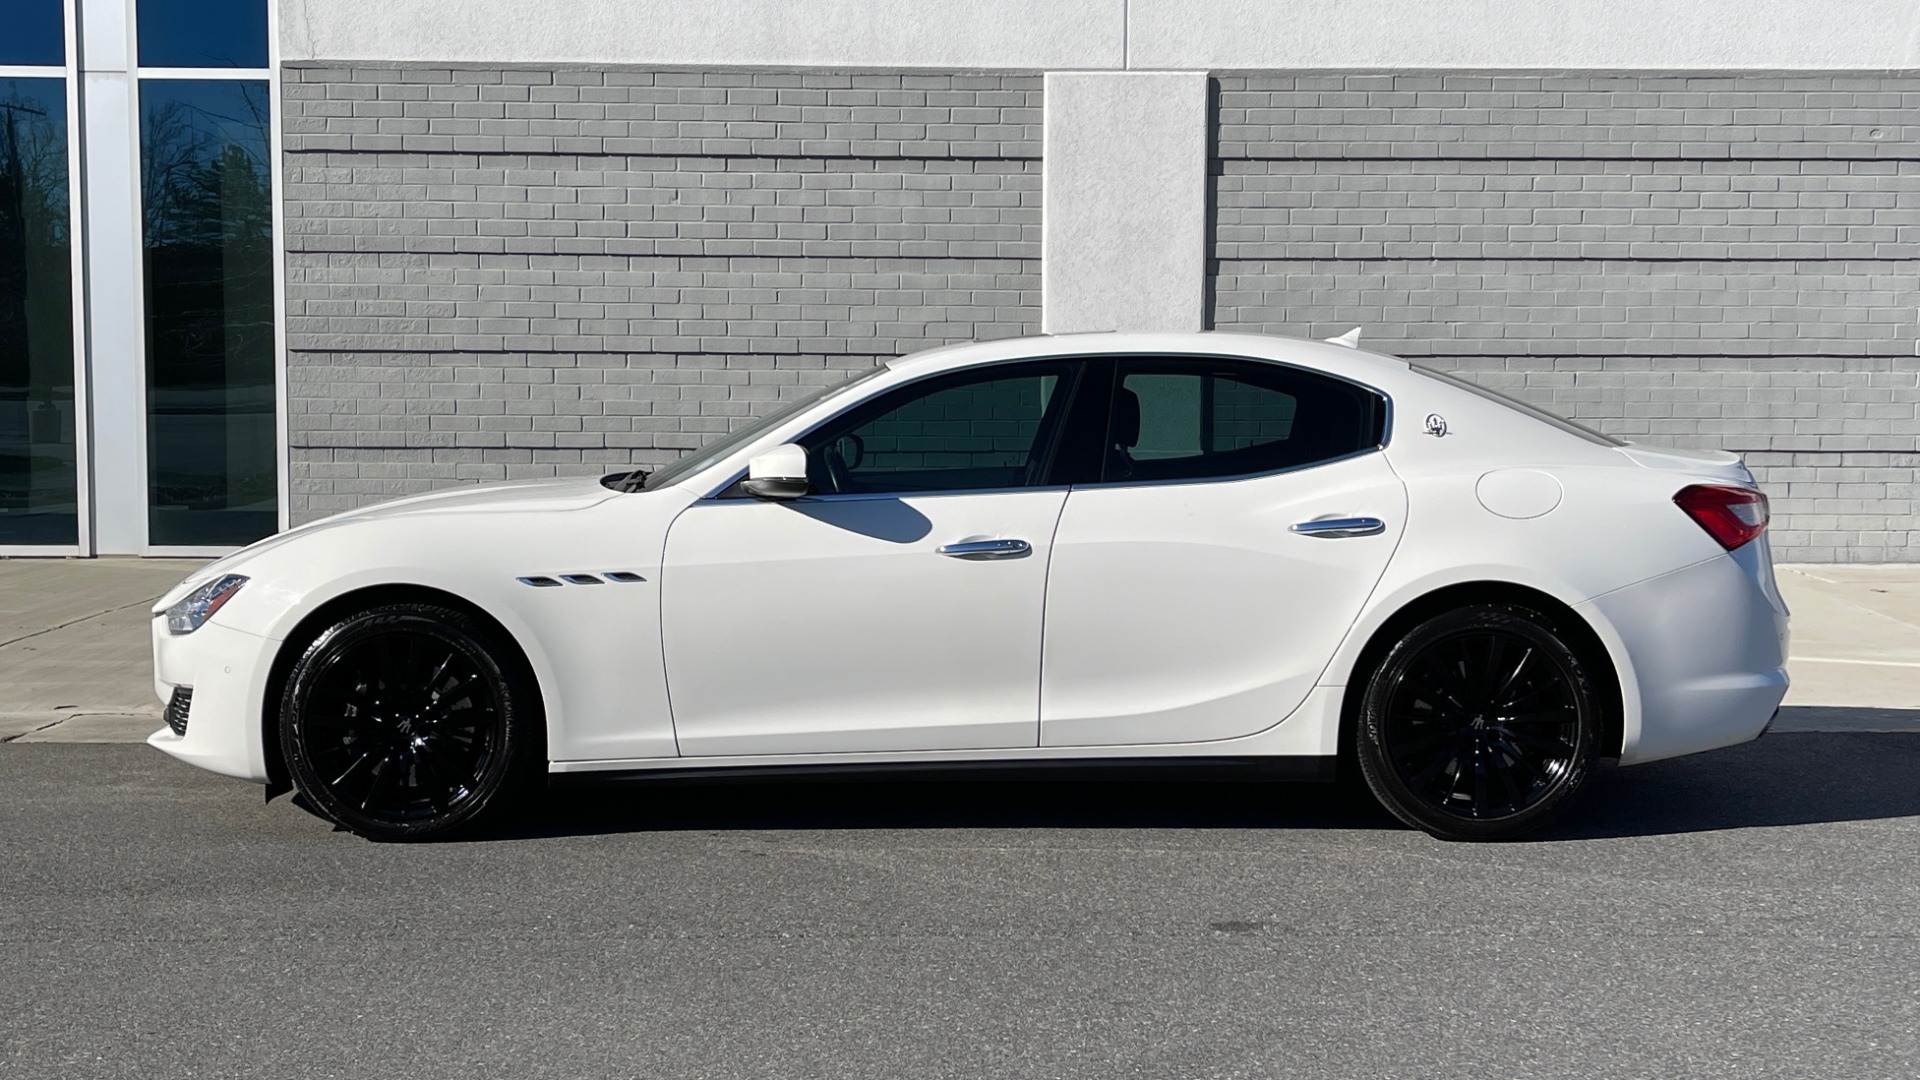 Used 2018 Maserati GHIBLI S Q4 3.0L SEDAN / AWD / NAV / SUNROOF / APPLE / HTD STS / REARVIEW for sale $49,995 at Formula Imports in Charlotte NC 28227 3